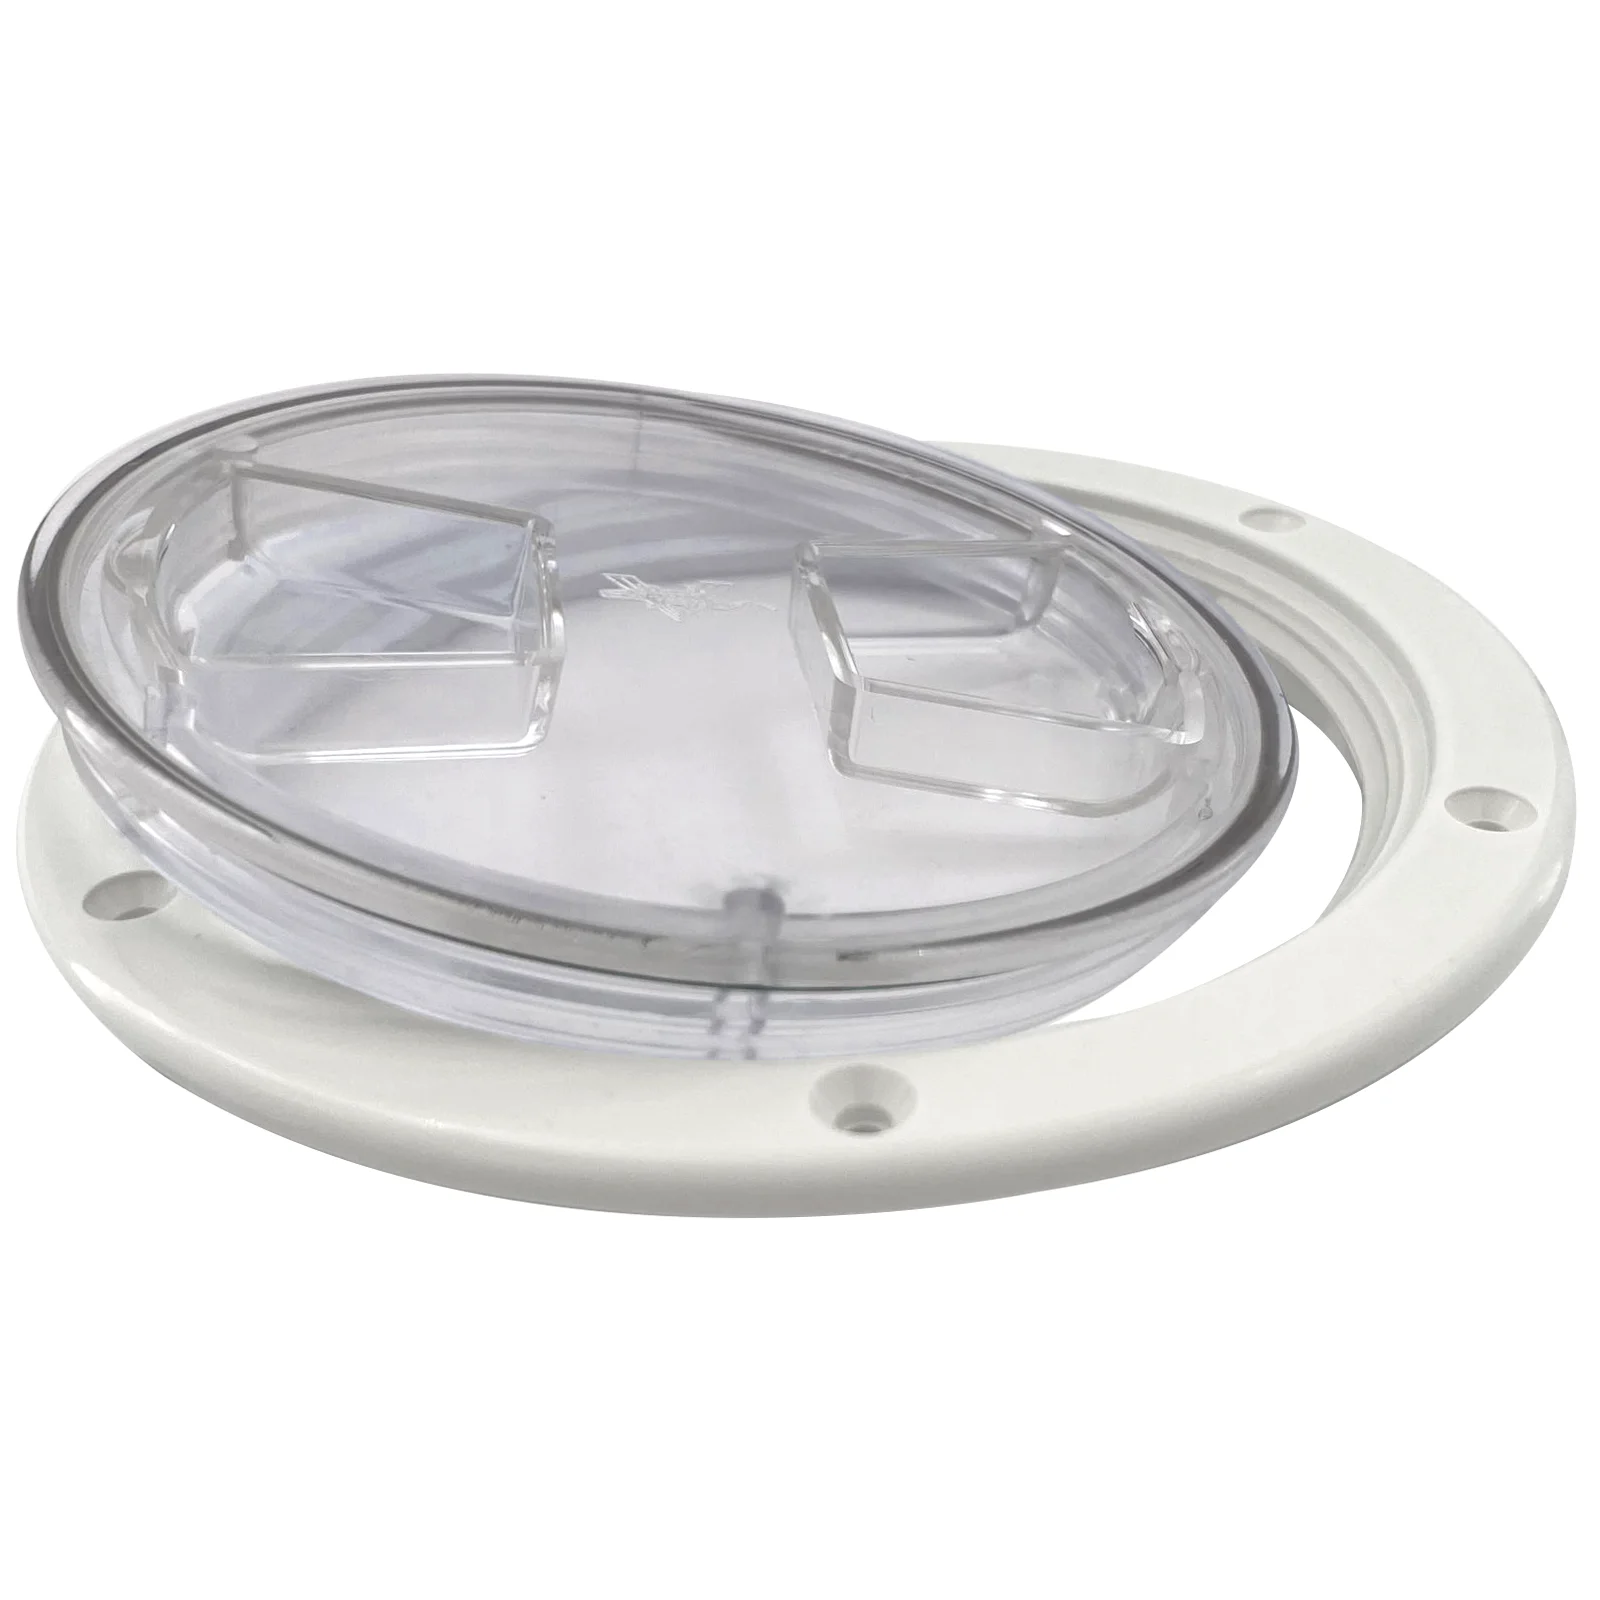 Plastic 4 inch Transparent Round Deck Inspection Access Hatch Cover White Boat Screw Out Plate For Yacht Marine